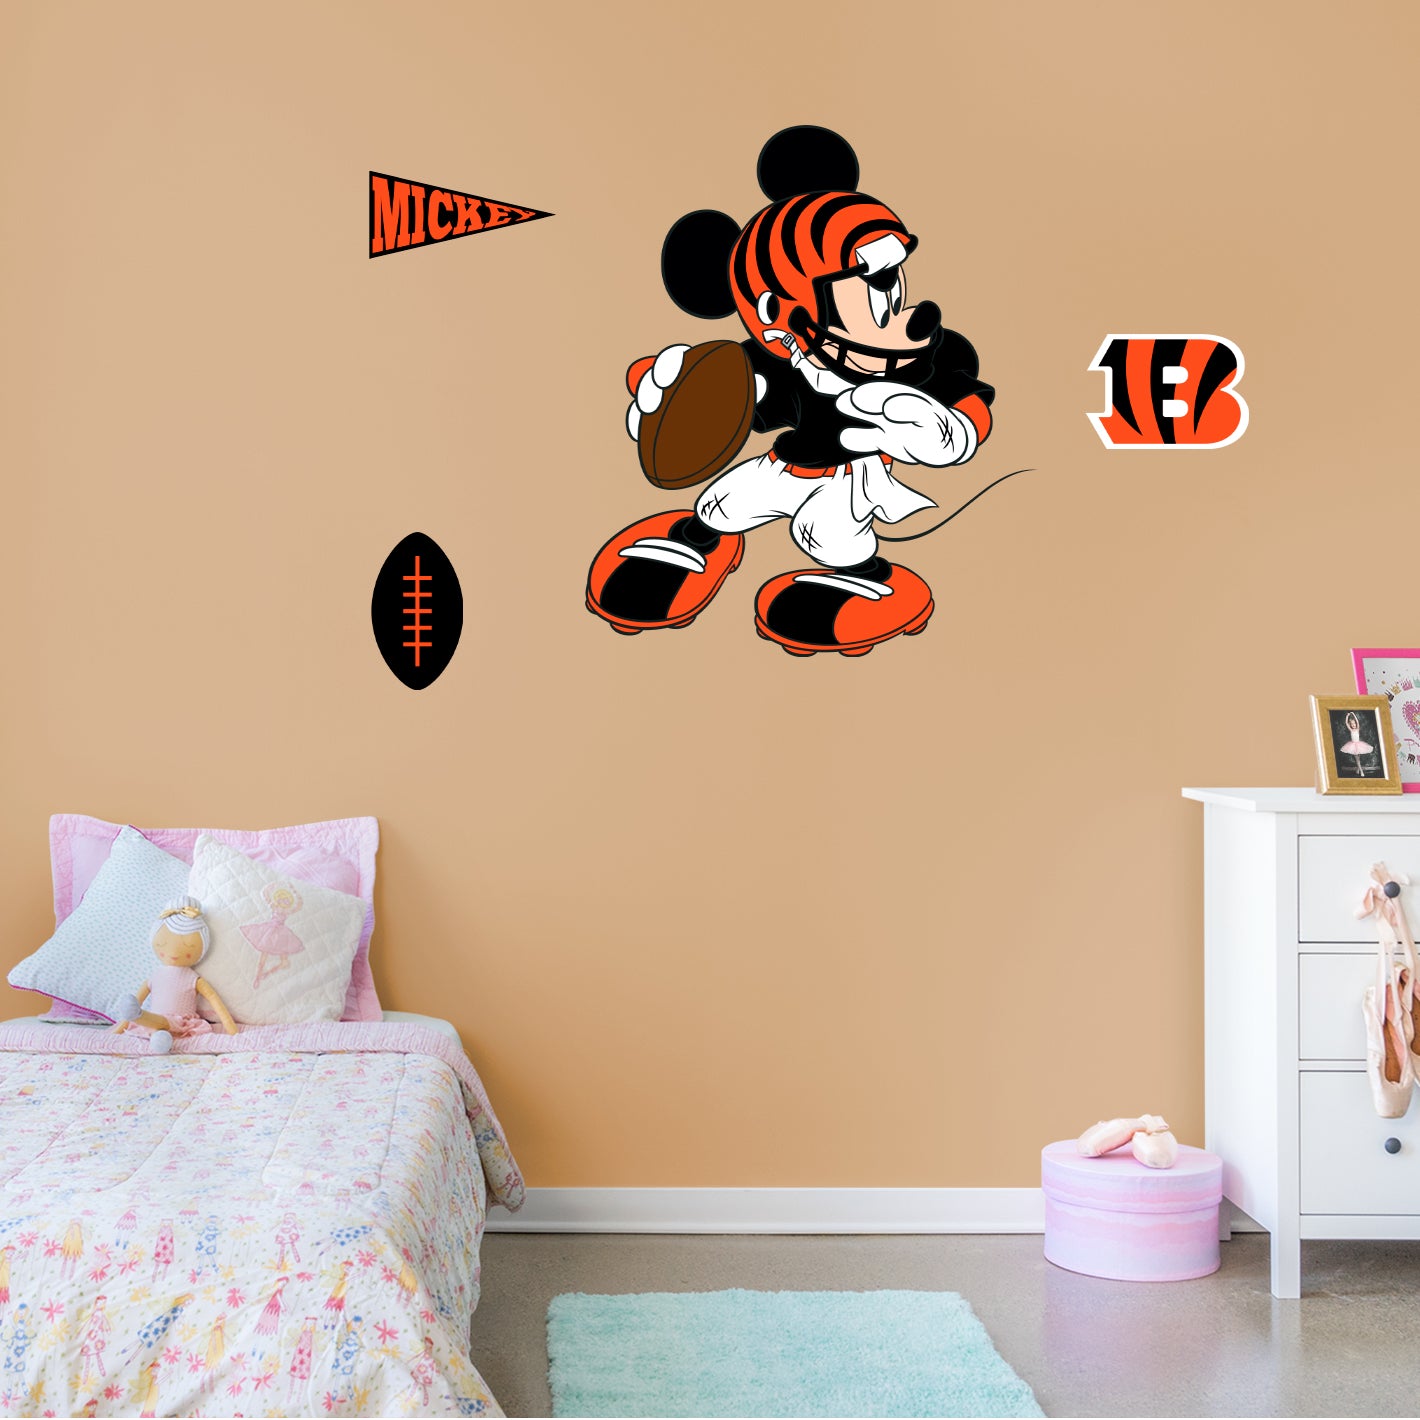 Cincinnati Bengals: Mickey Mouse 2021 - Officially Licensed NFL